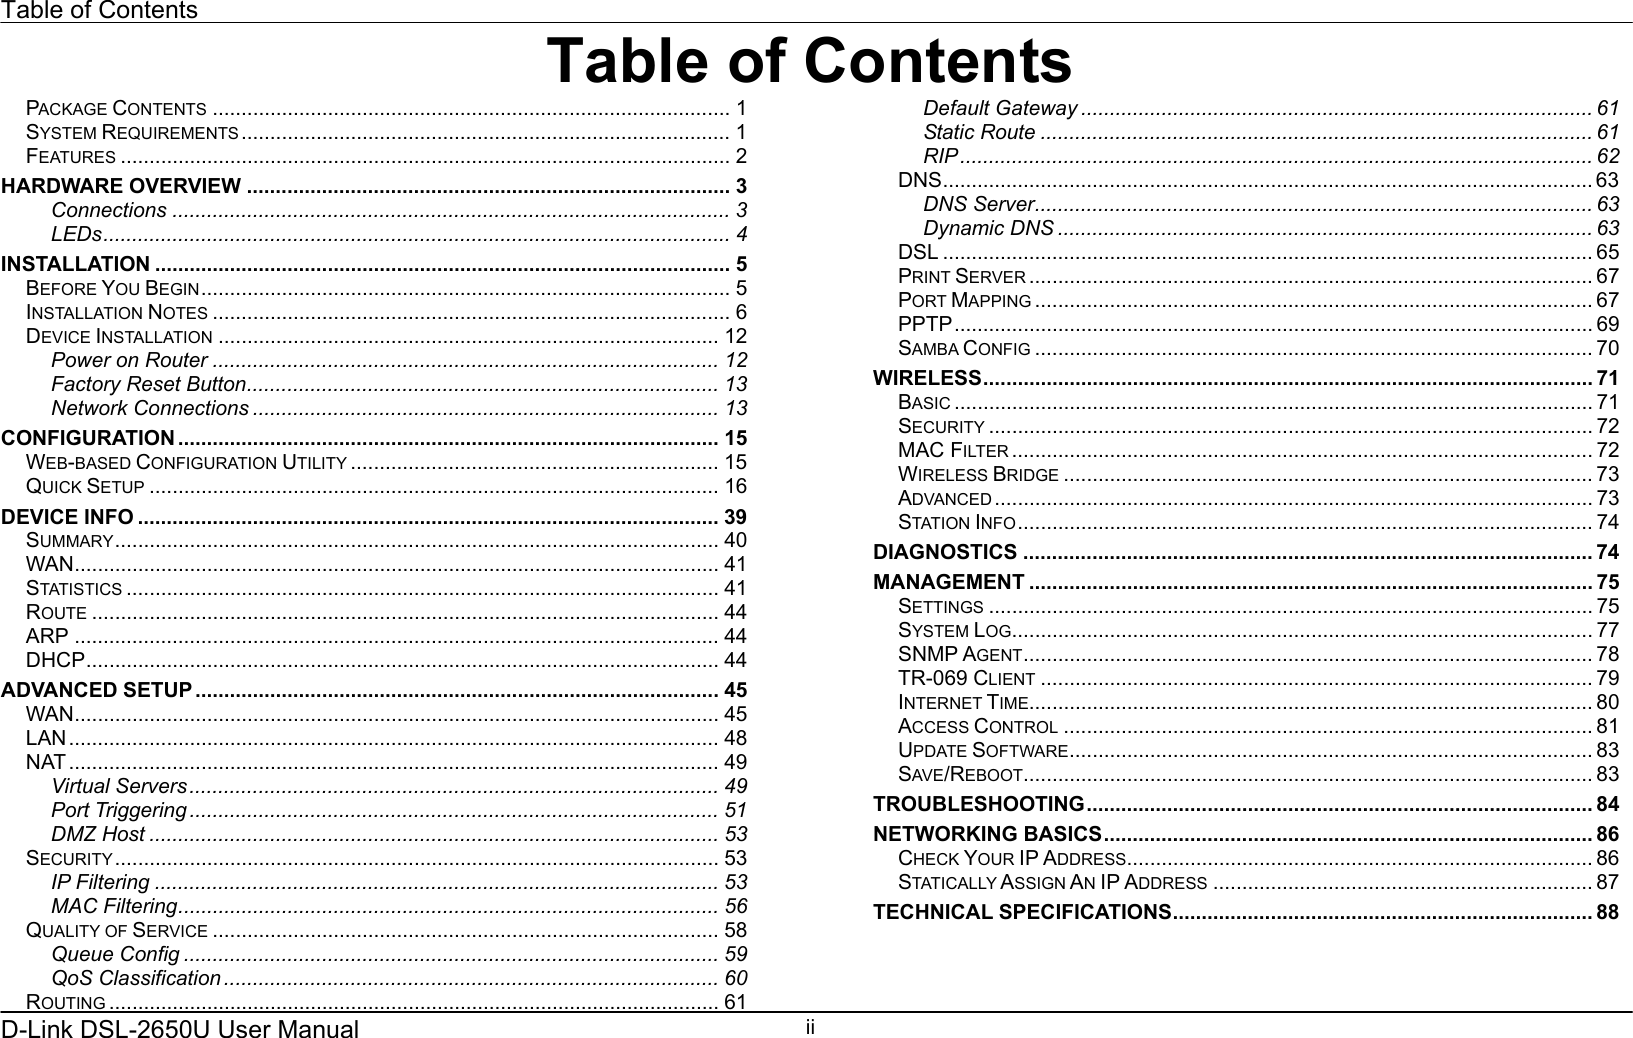 Table of Contents D-Link DSL-2650U User Manual    iiTable of ContentsPACKAGE CONTENTS .......................................................................................... 1 SYSTEM REQUIREMENTS ..................................................................................... 1 FEATURES .......................................................................................................... 2 HARDWARE OVERVIEW .................................................................................... 3 Connections ................................................................................................. 3 LEDs............................................................................................................. 4 INSTALLATION .................................................................................................... 5 BEFORE YOU BEGIN............................................................................................ 5 INSTALLATION NOTES .......................................................................................... 6 DEVICE INSTALLATION ....................................................................................... 12 Power on Router ........................................................................................ 12 Factory Reset Button.................................................................................. 13 Network Connections ................................................................................. 13 CONFIGURATION .............................................................................................. 15 WEB-BASED CONFIGURATION UTILITY ................................................................ 15 QUICK SETUP ................................................................................................... 16 DEVICE INFO ..................................................................................................... 39 SUMMARY......................................................................................................... 40 WAN................................................................................................................ 41 STATISTICS ....................................................................................................... 41 ROUTE ............................................................................................................. 44 ARP ................................................................................................................ 44 DHCP.............................................................................................................. 44 ADVANCED SETUP ........................................................................................... 45 WAN................................................................................................................ 45 LAN................................................................................................................. 48 NAT ................................................................................................................. 49 Virtual Servers............................................................................................ 49 Port Triggering ............................................................................................ 51 DMZ Host ................................................................................................... 53 SECURITY......................................................................................................... 53 IP Filtering .................................................................................................. 53 MAC Filtering.............................................................................................. 56 QUALITY OF SERVICE ........................................................................................ 58 Queue Config ............................................................................................. 59 QoS Classification ...................................................................................... 60 ROUTING .......................................................................................................... 61 Default Gateway ......................................................................................... 61 Static Route ................................................................................................ 61 RIP.............................................................................................................. 62 DNS................................................................................................................. 63 DNS Server................................................................................................. 63 Dynamic DNS ............................................................................................. 63 DSL ................................................................................................................. 65 PRINT SERVER .................................................................................................. 67 PORT MAPPING ................................................................................................. 67 PPTP............................................................................................................... 69 SAMBA CONFIG ................................................................................................. 70 WIRELESS.......................................................................................................... 71 BASIC ............................................................................................................... 71 SECURITY ......................................................................................................... 72 MAC FILTER ..................................................................................................... 72 WIRELESS BRIDGE ............................................................................................ 73 ADVANCED ........................................................................................................ 73 STATION INFO.................................................................................................... 74 DIAGNOSTICS ................................................................................................... 74 MANAGEMENT .................................................................................................. 75 SETTINGS ......................................................................................................... 75 SYSTEM LOG..................................................................................................... 77 SNMP AGENT................................................................................................... 78 TR-069 CLIENT ................................................................................................ 79 INTERNET TIME.................................................................................................. 80 ACCESS CONTROL ............................................................................................ 81 UPDATE SOFTWARE........................................................................................... 83 SAVE/REBOOT................................................................................................... 83 TROUBLESHOOTING........................................................................................ 84 NETWORKING BASICS..................................................................................... 86 CHECK YOUR IP ADDRESS................................................................................. 86 STATICALLY ASSIGN AN IP ADDRESS .................................................................. 87 TECHNICAL SPECIFICATIONS......................................................................... 88  